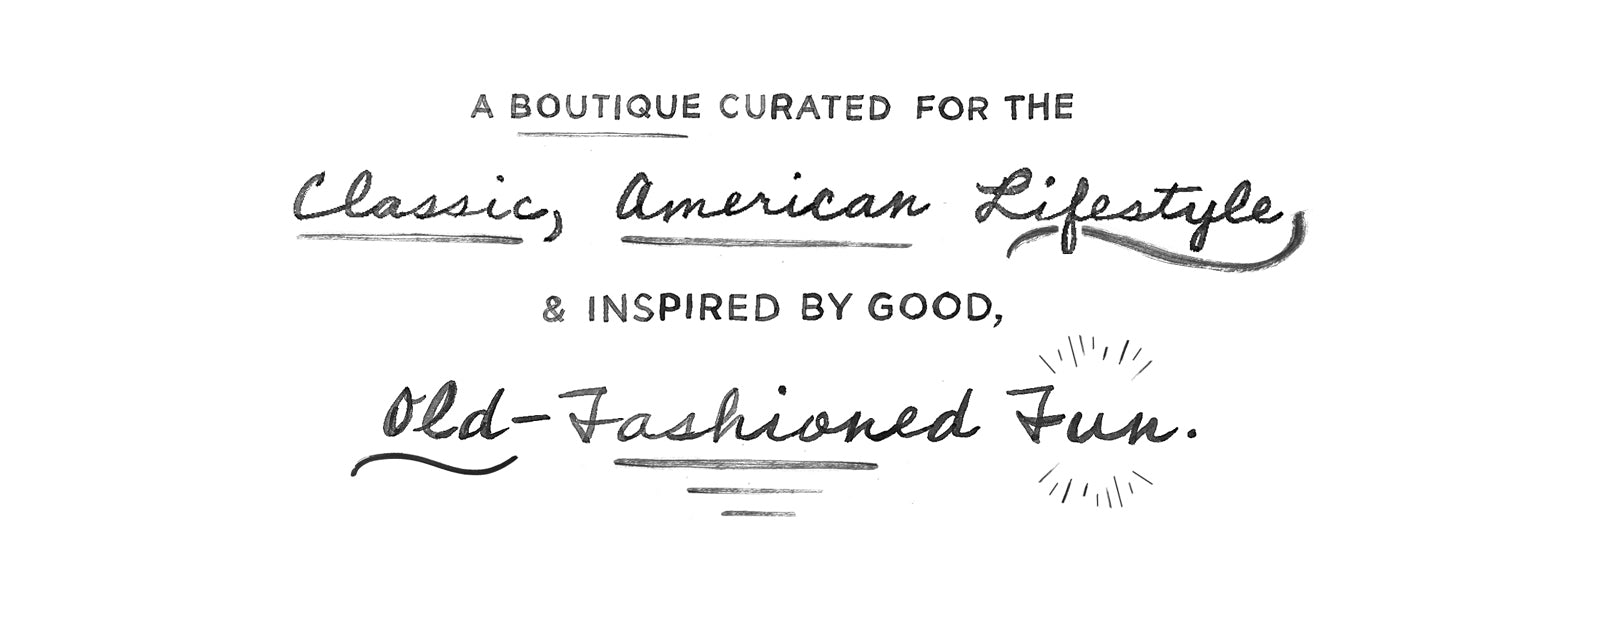 a boutique curated for the classic american lifestyle and inspired by good old fashioned fun